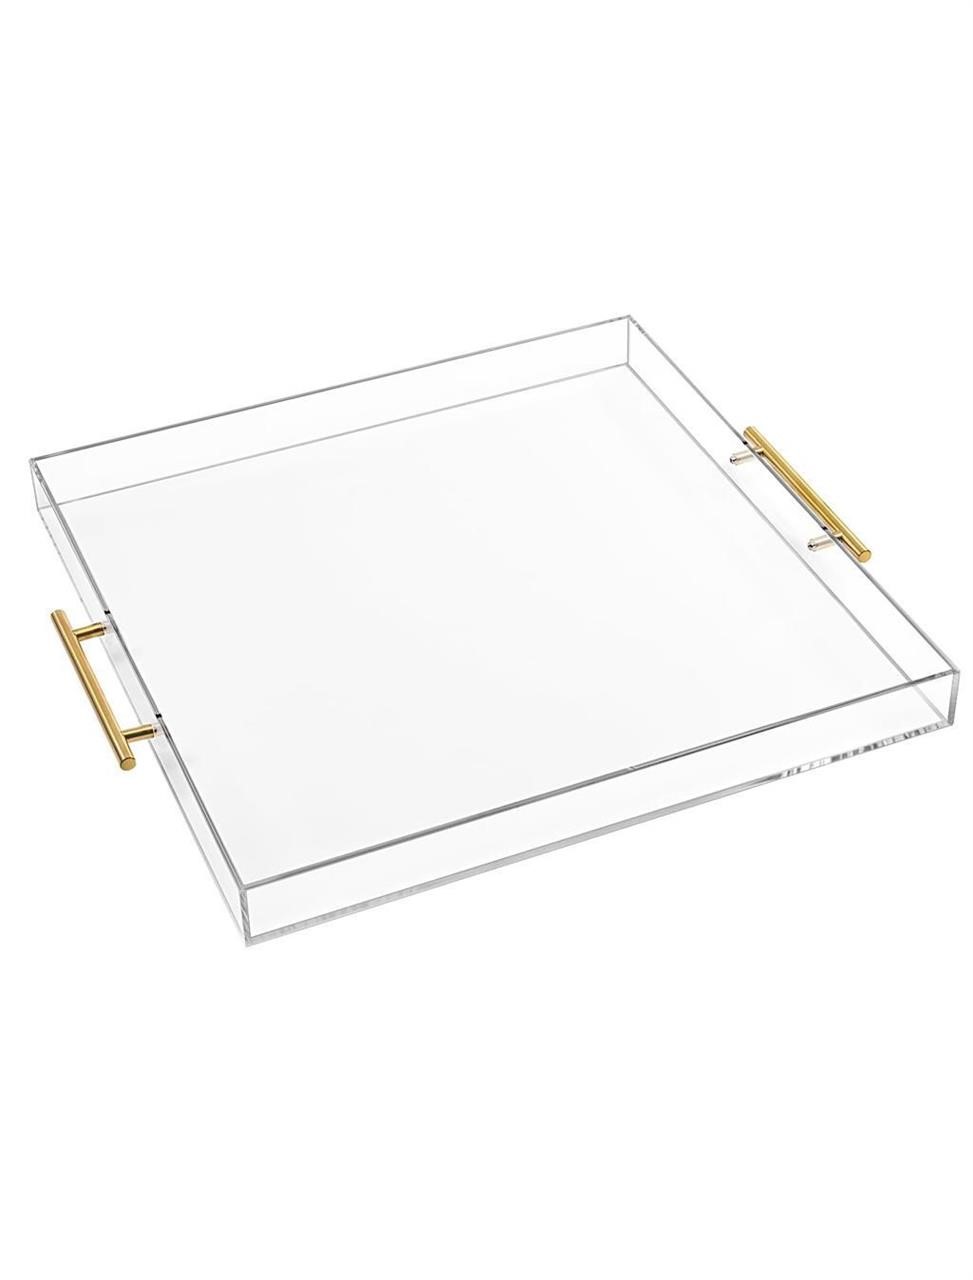 18 18 Inches Large Clear Acrylic Serving tray